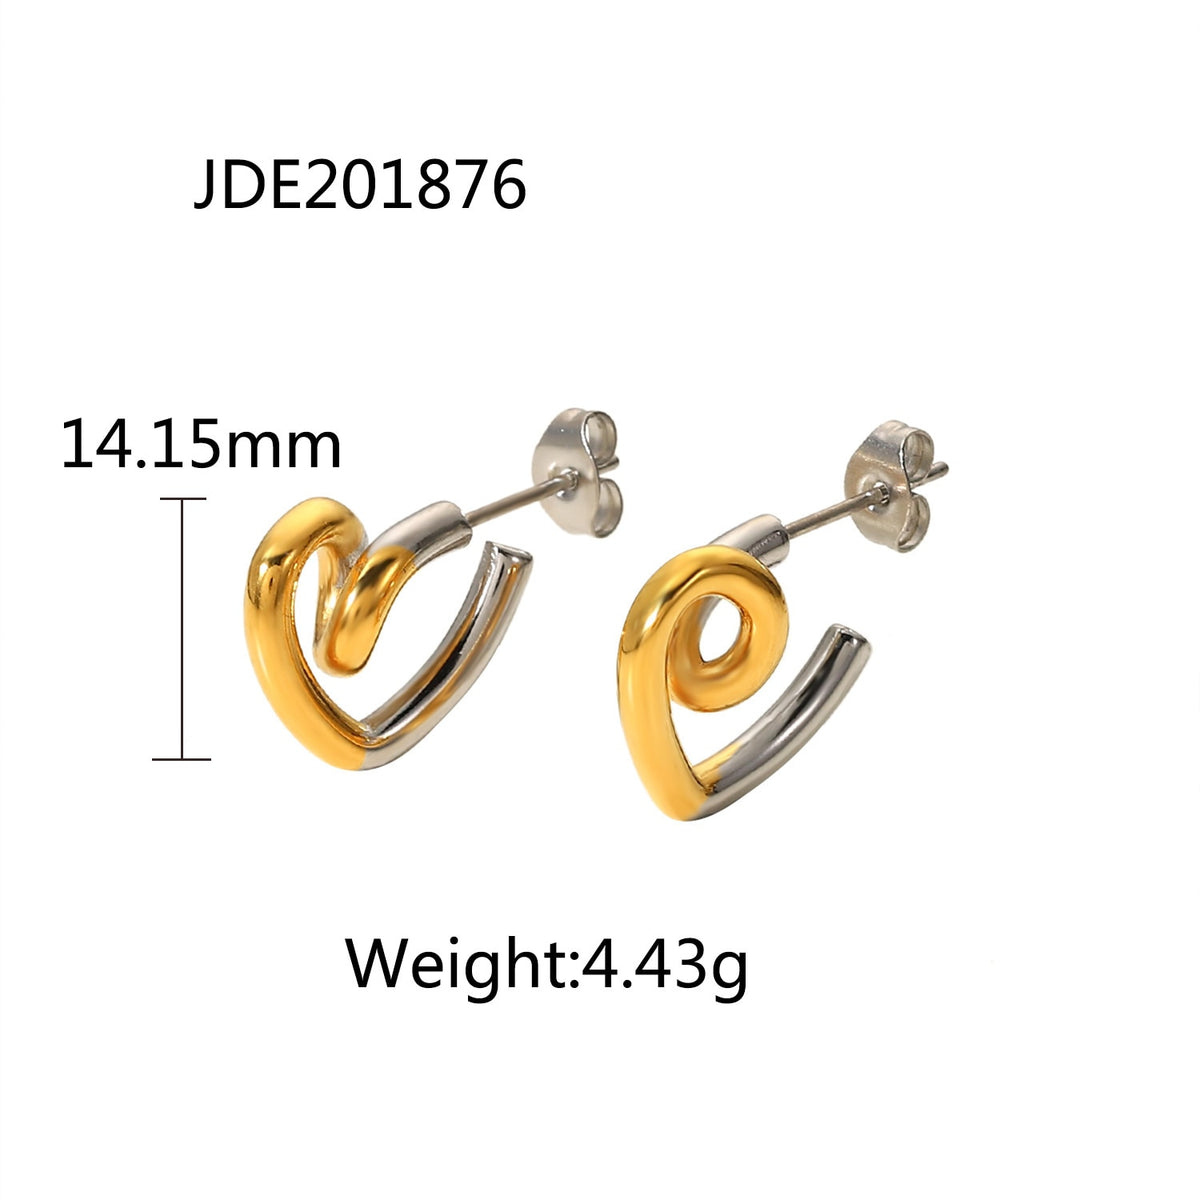 Geometric Stainless Steel Double Layer CC Shaped Hoop Earrings 18K PVD Gold Plated Twisted Heart Earring Jewelry